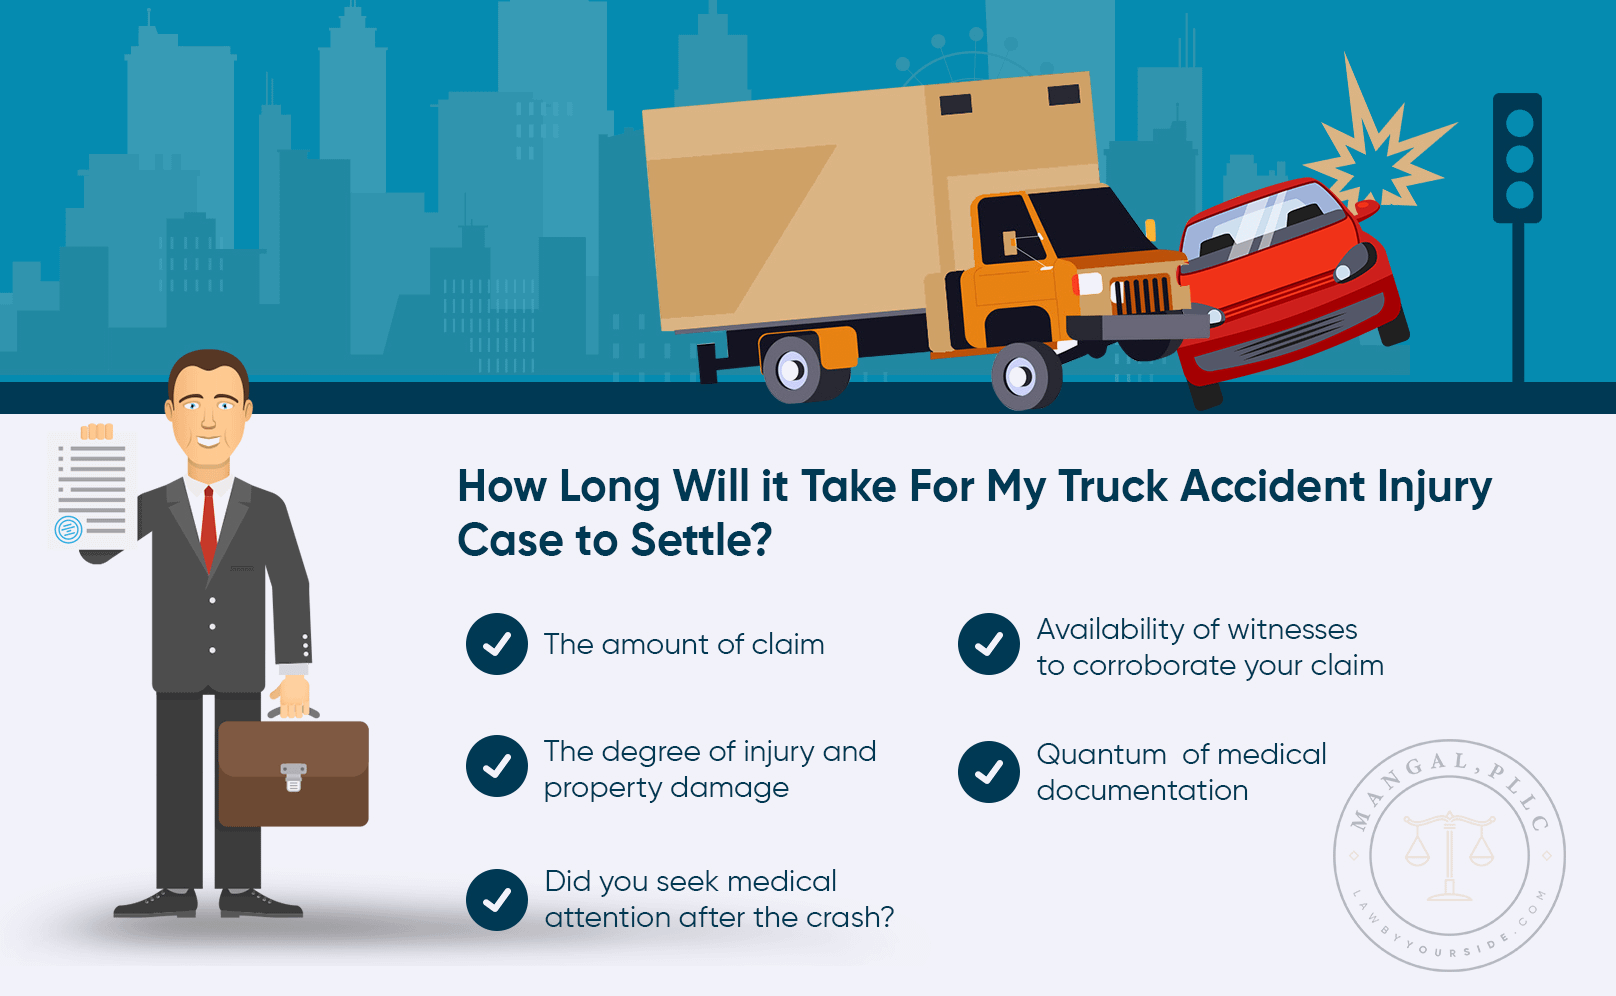 Truck-Accident-Injury-Case-to-Settle